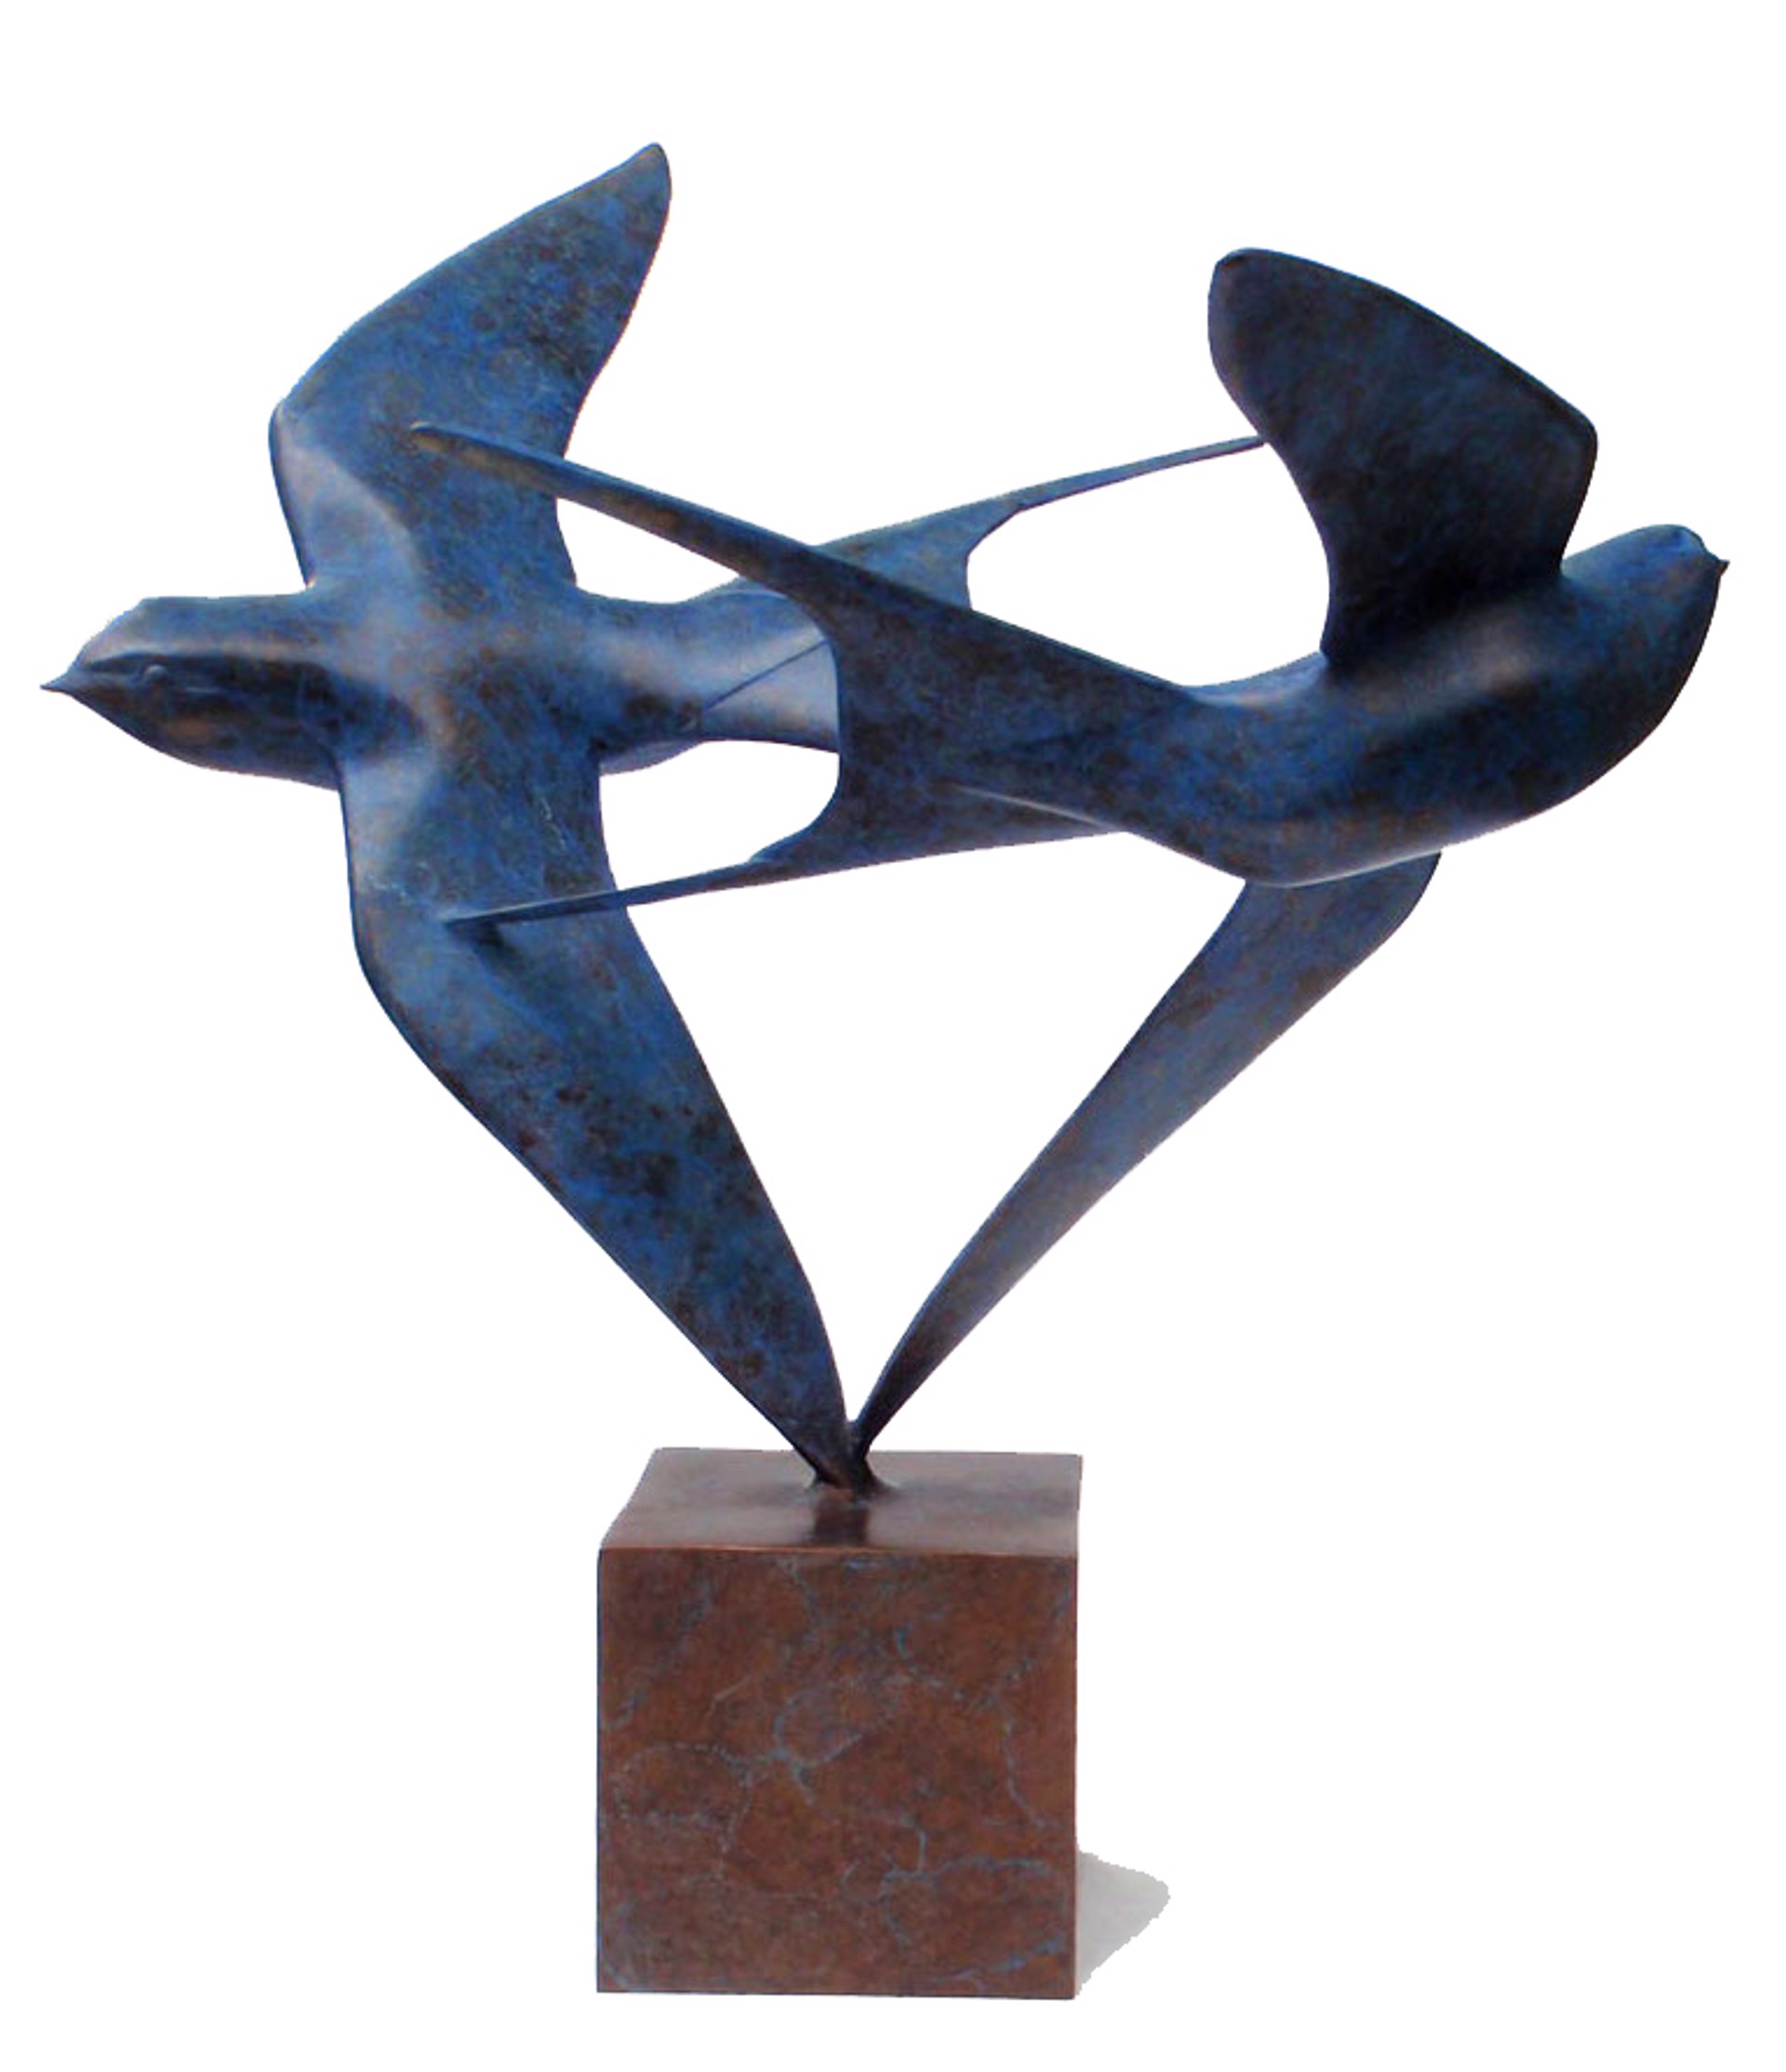 Bronze Sculpture Of Two Swallows In Flight In A Circular Motion Featuring A Contemporary Patina, By Kristine Taylor